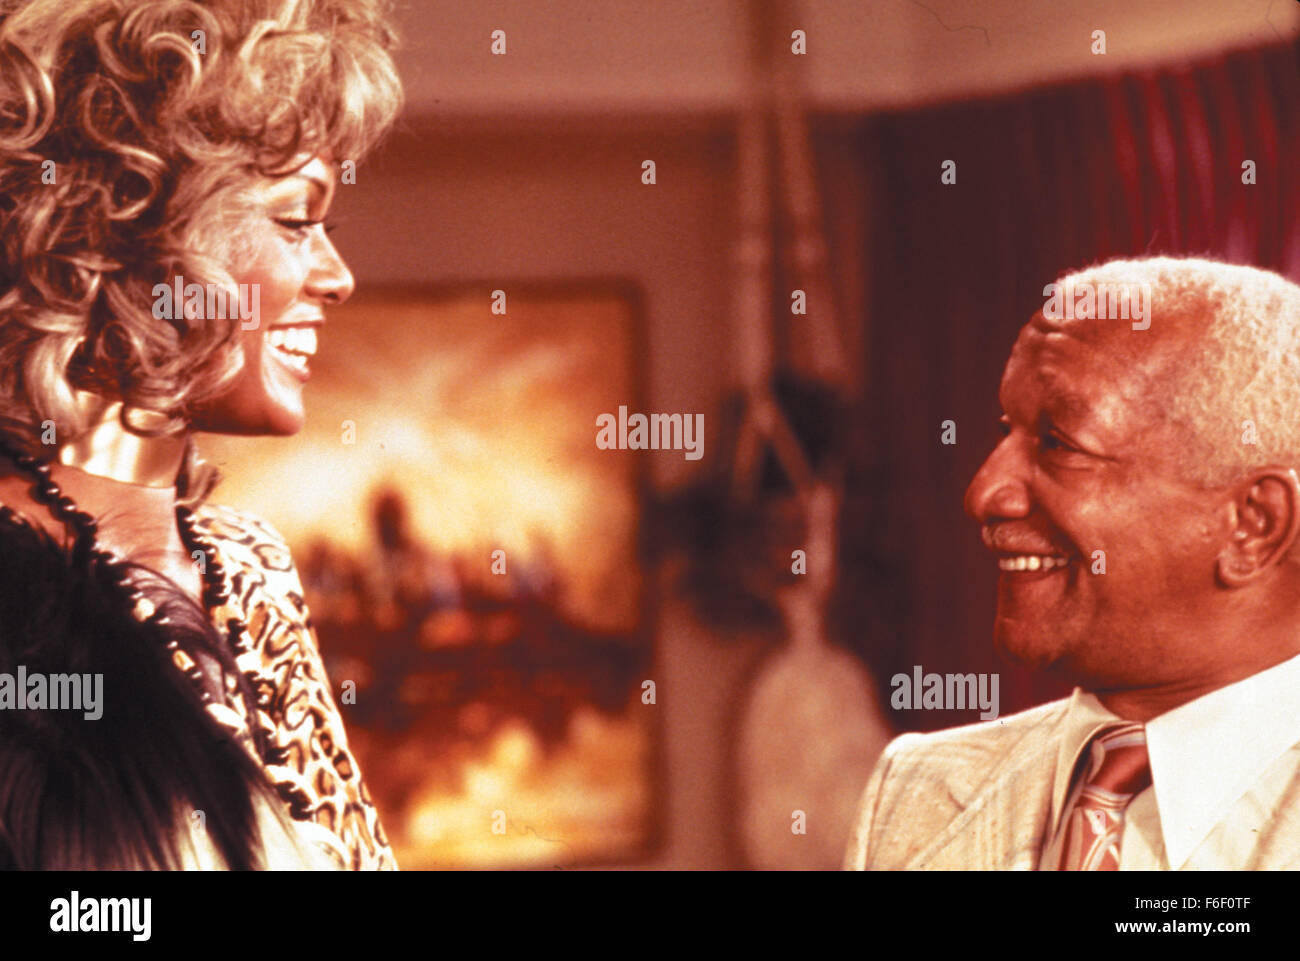 RELEASE DATE: September 29, 1976. MOVIE TITLE: Norman Is That You. STUDIO: Metro-Goldwyn-Mayer (MGM). PLOT: . PICTURED: REDD FOXX as Ben Chambers. Stock Photo